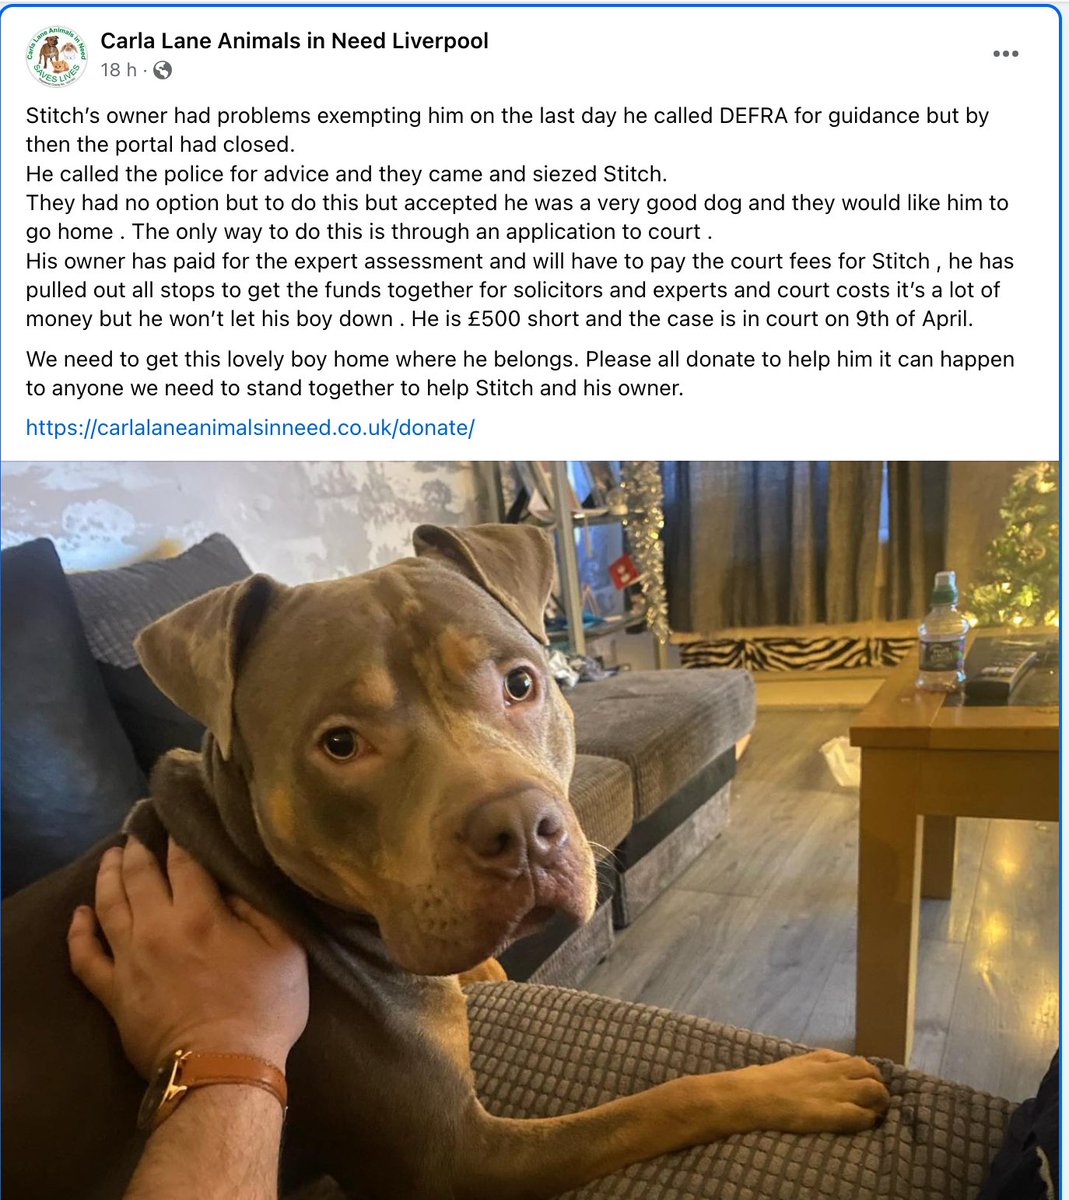 Can anyone help get this beautiful boy Stitch back home where he belongs? If so visit Carla Lane rescue's page on Facebook and find the original post from Sunday April 7. #dogsoftwitter #dogsofx #adoptdontshop #xlbully #xlbullies #xlbullys #xlbullyban #bannedbreeds #adoptdontbuy